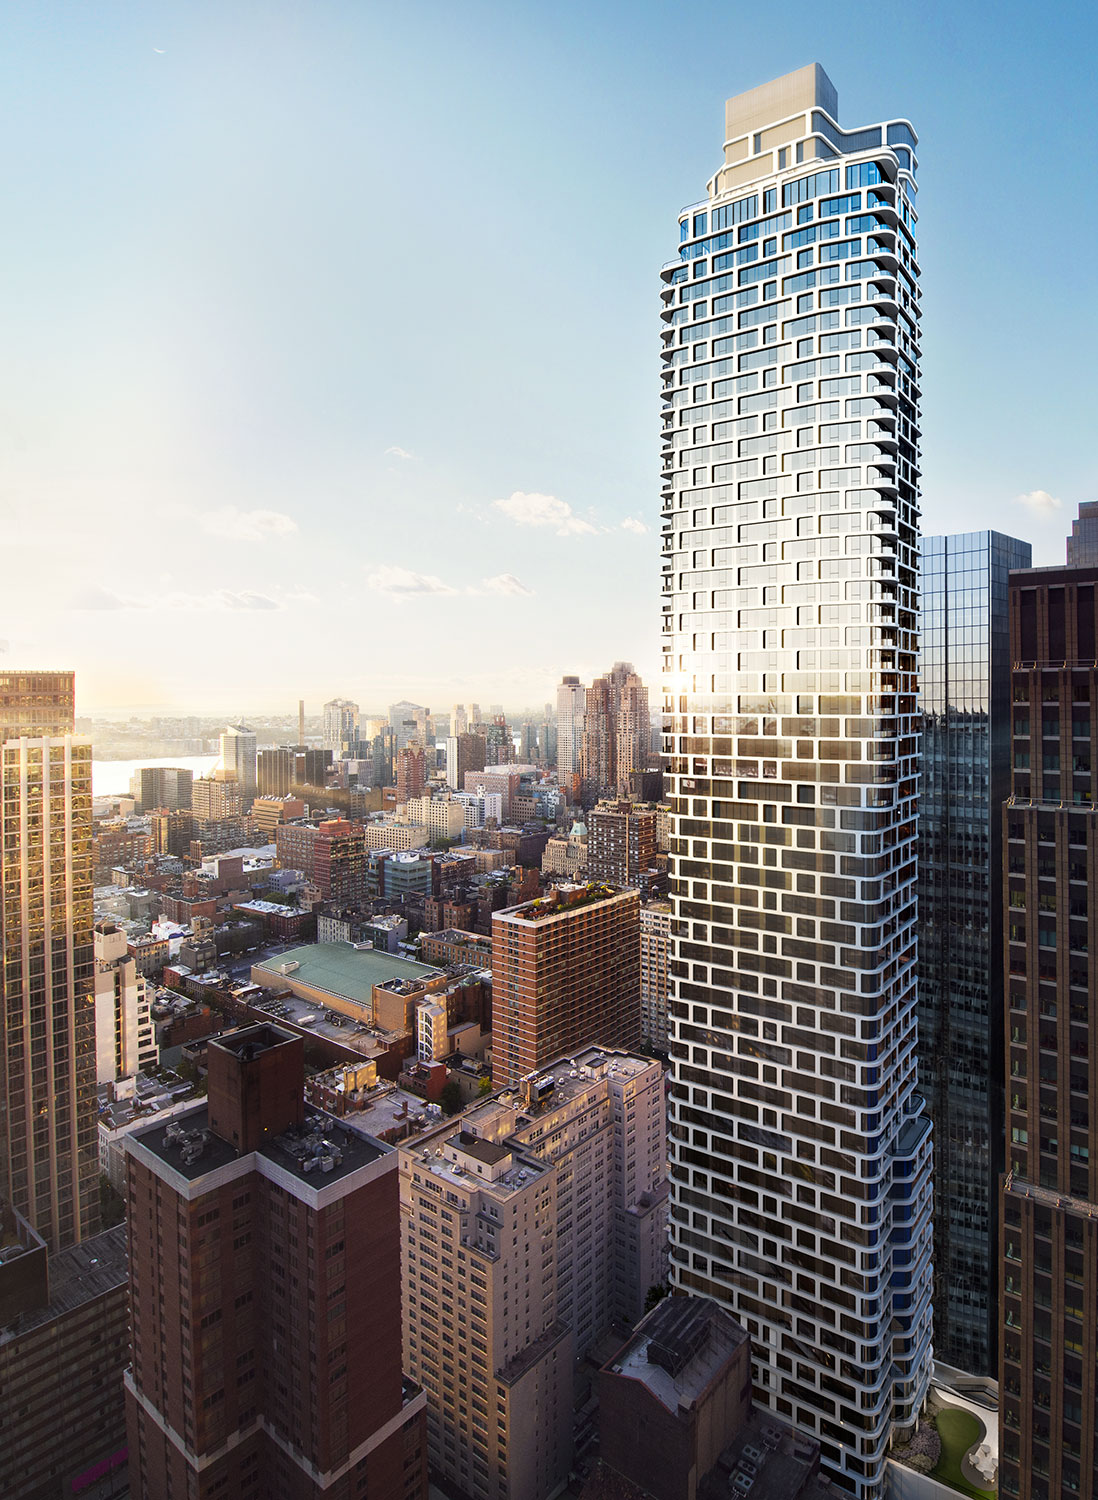 ARO’s curved glass tower enhances its surroundings with a distinctive white metal grid.